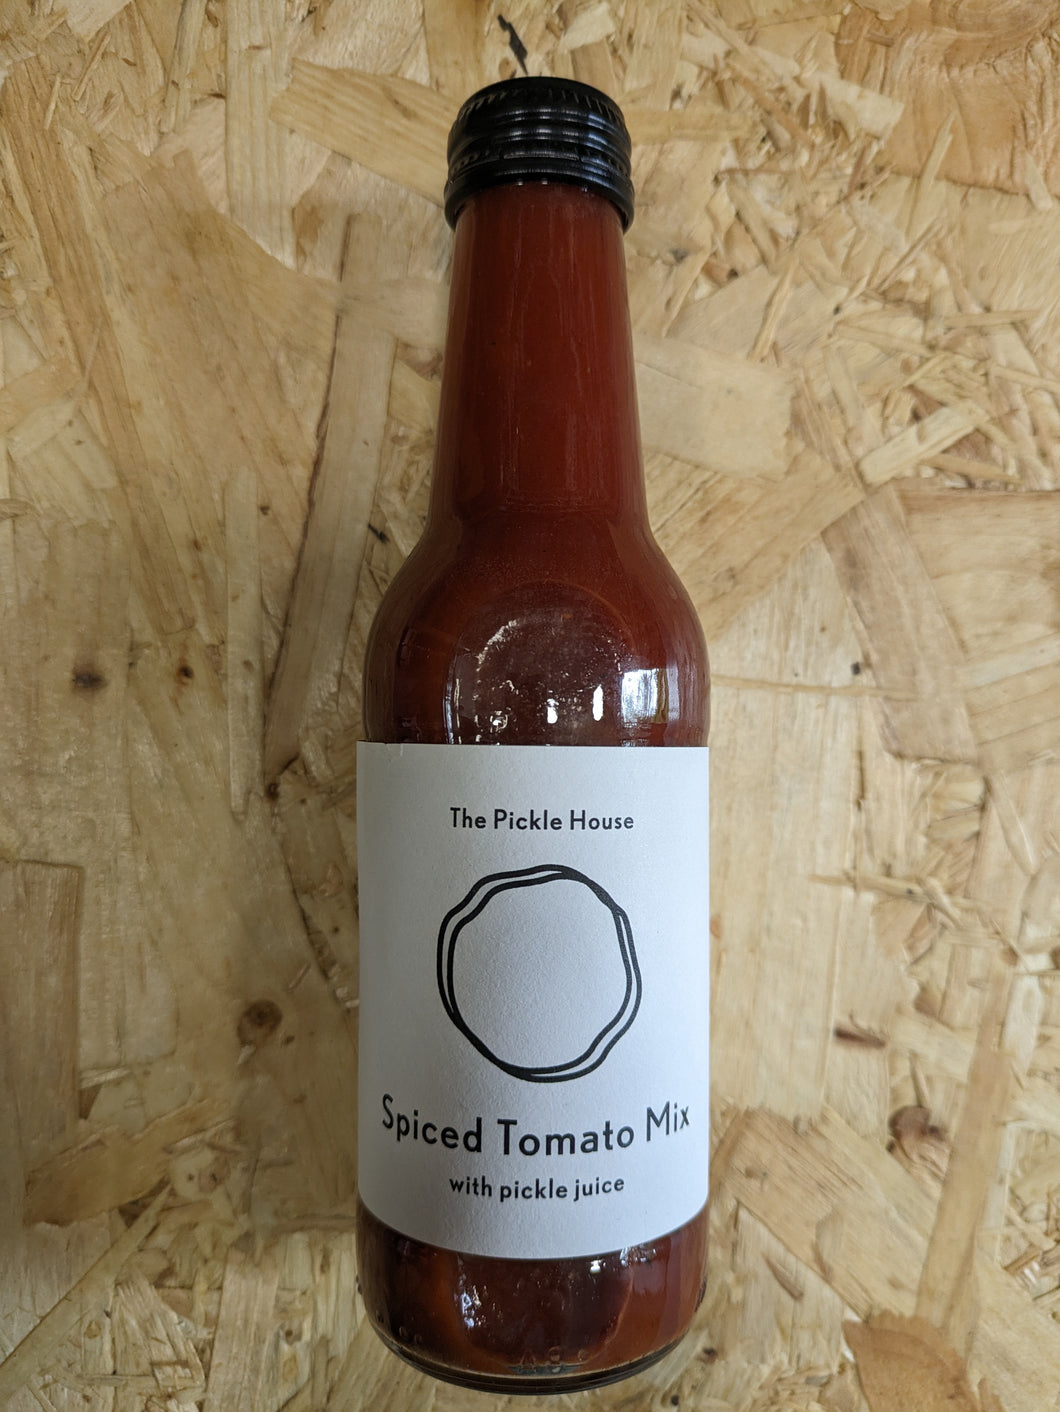 The Pickle House Spiced Tomato Mix